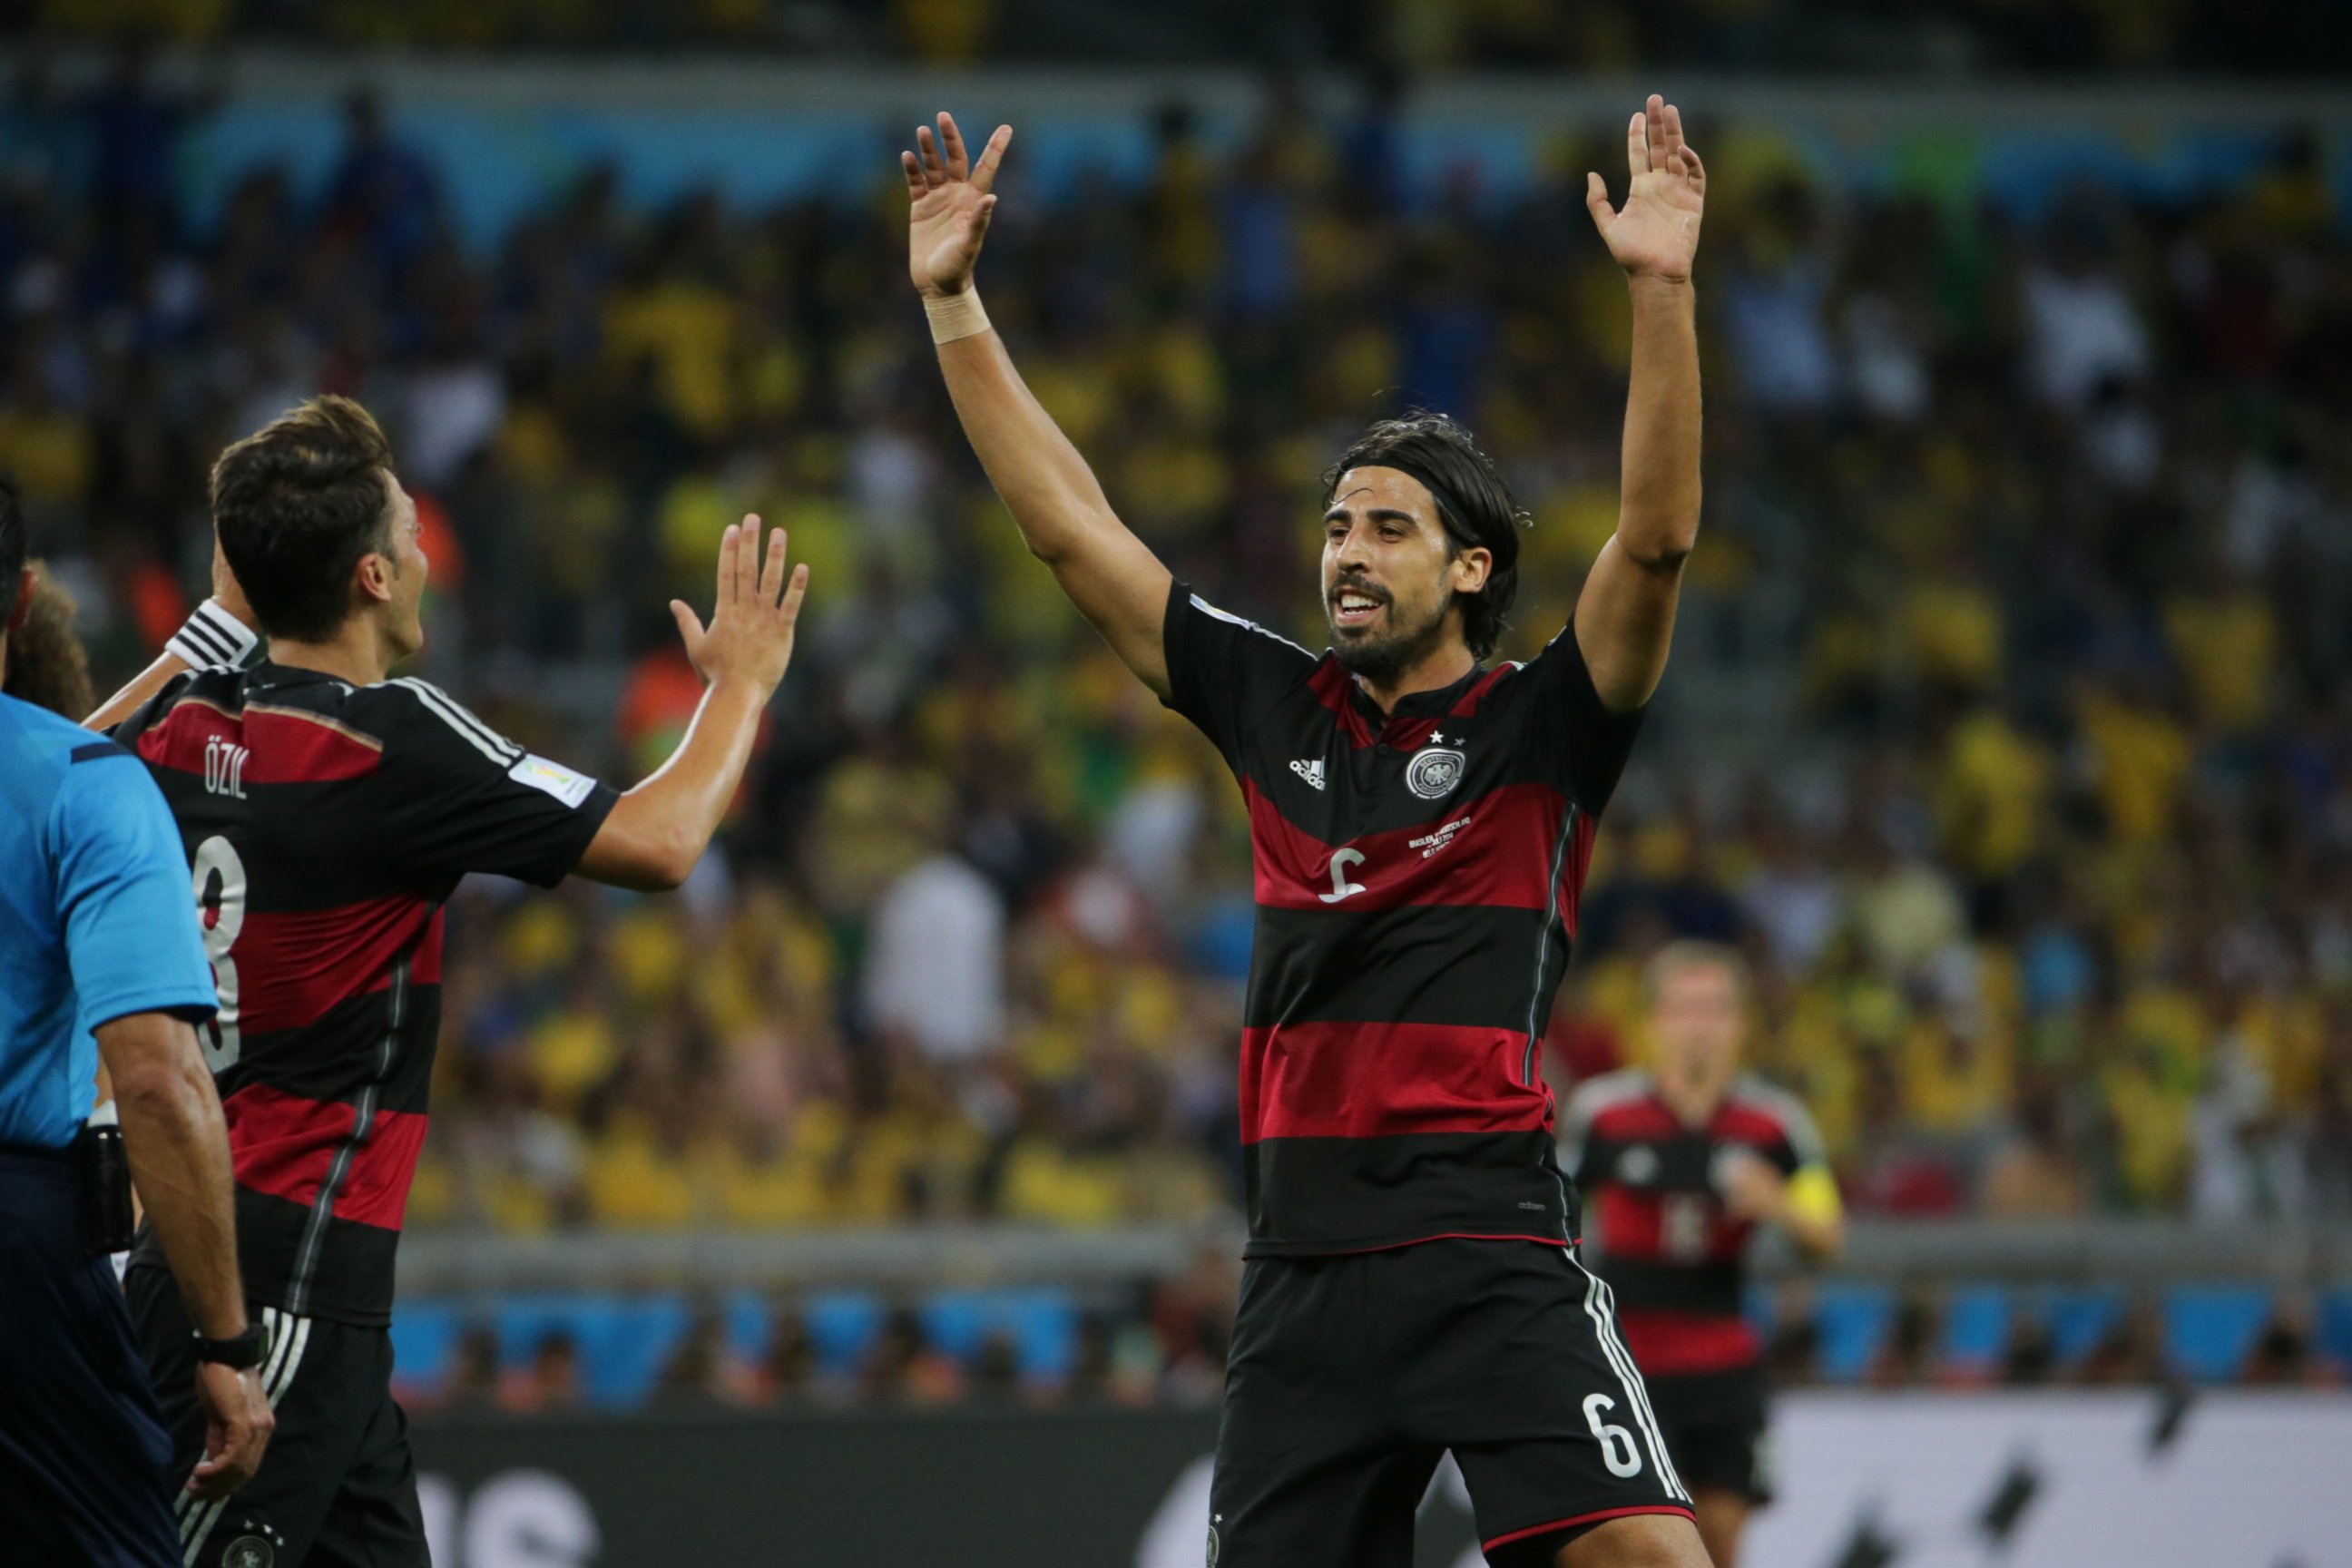 PHOTO: Germany's Sami Khedira, right, celebrates after scoring his goal during the World Cup semifinal soccer match between Brazil and Germany in Belo Horizonte, Brazil on July 8, 2014.